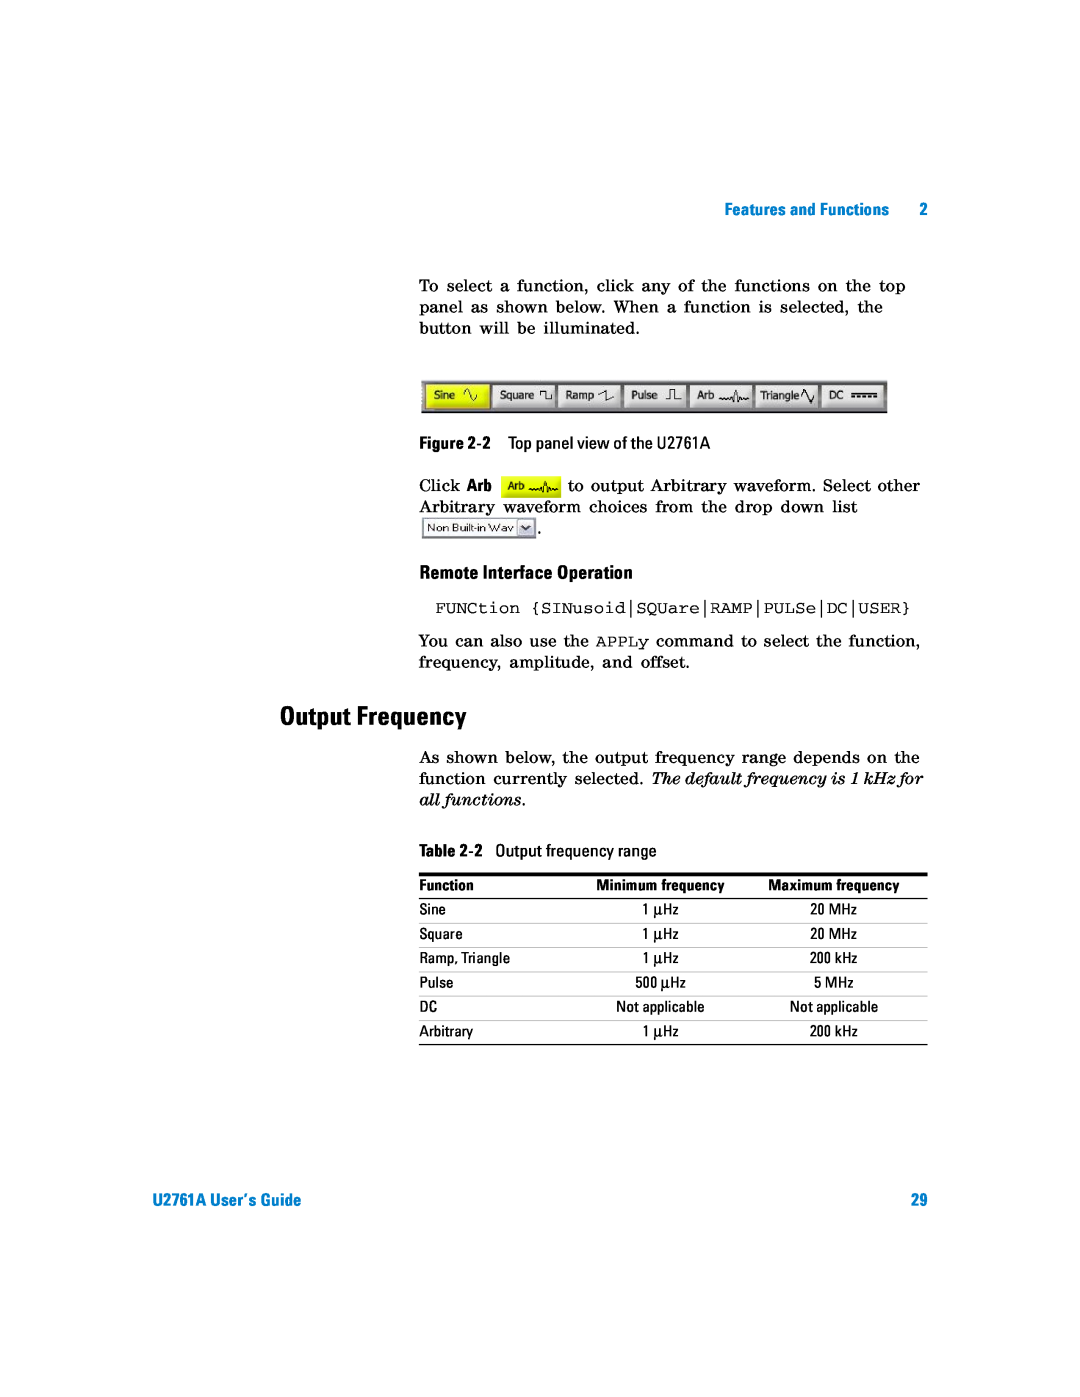 Agilent Technologies manual Output Frequency, Remote Interface Operation, U2761A User’s Guide 